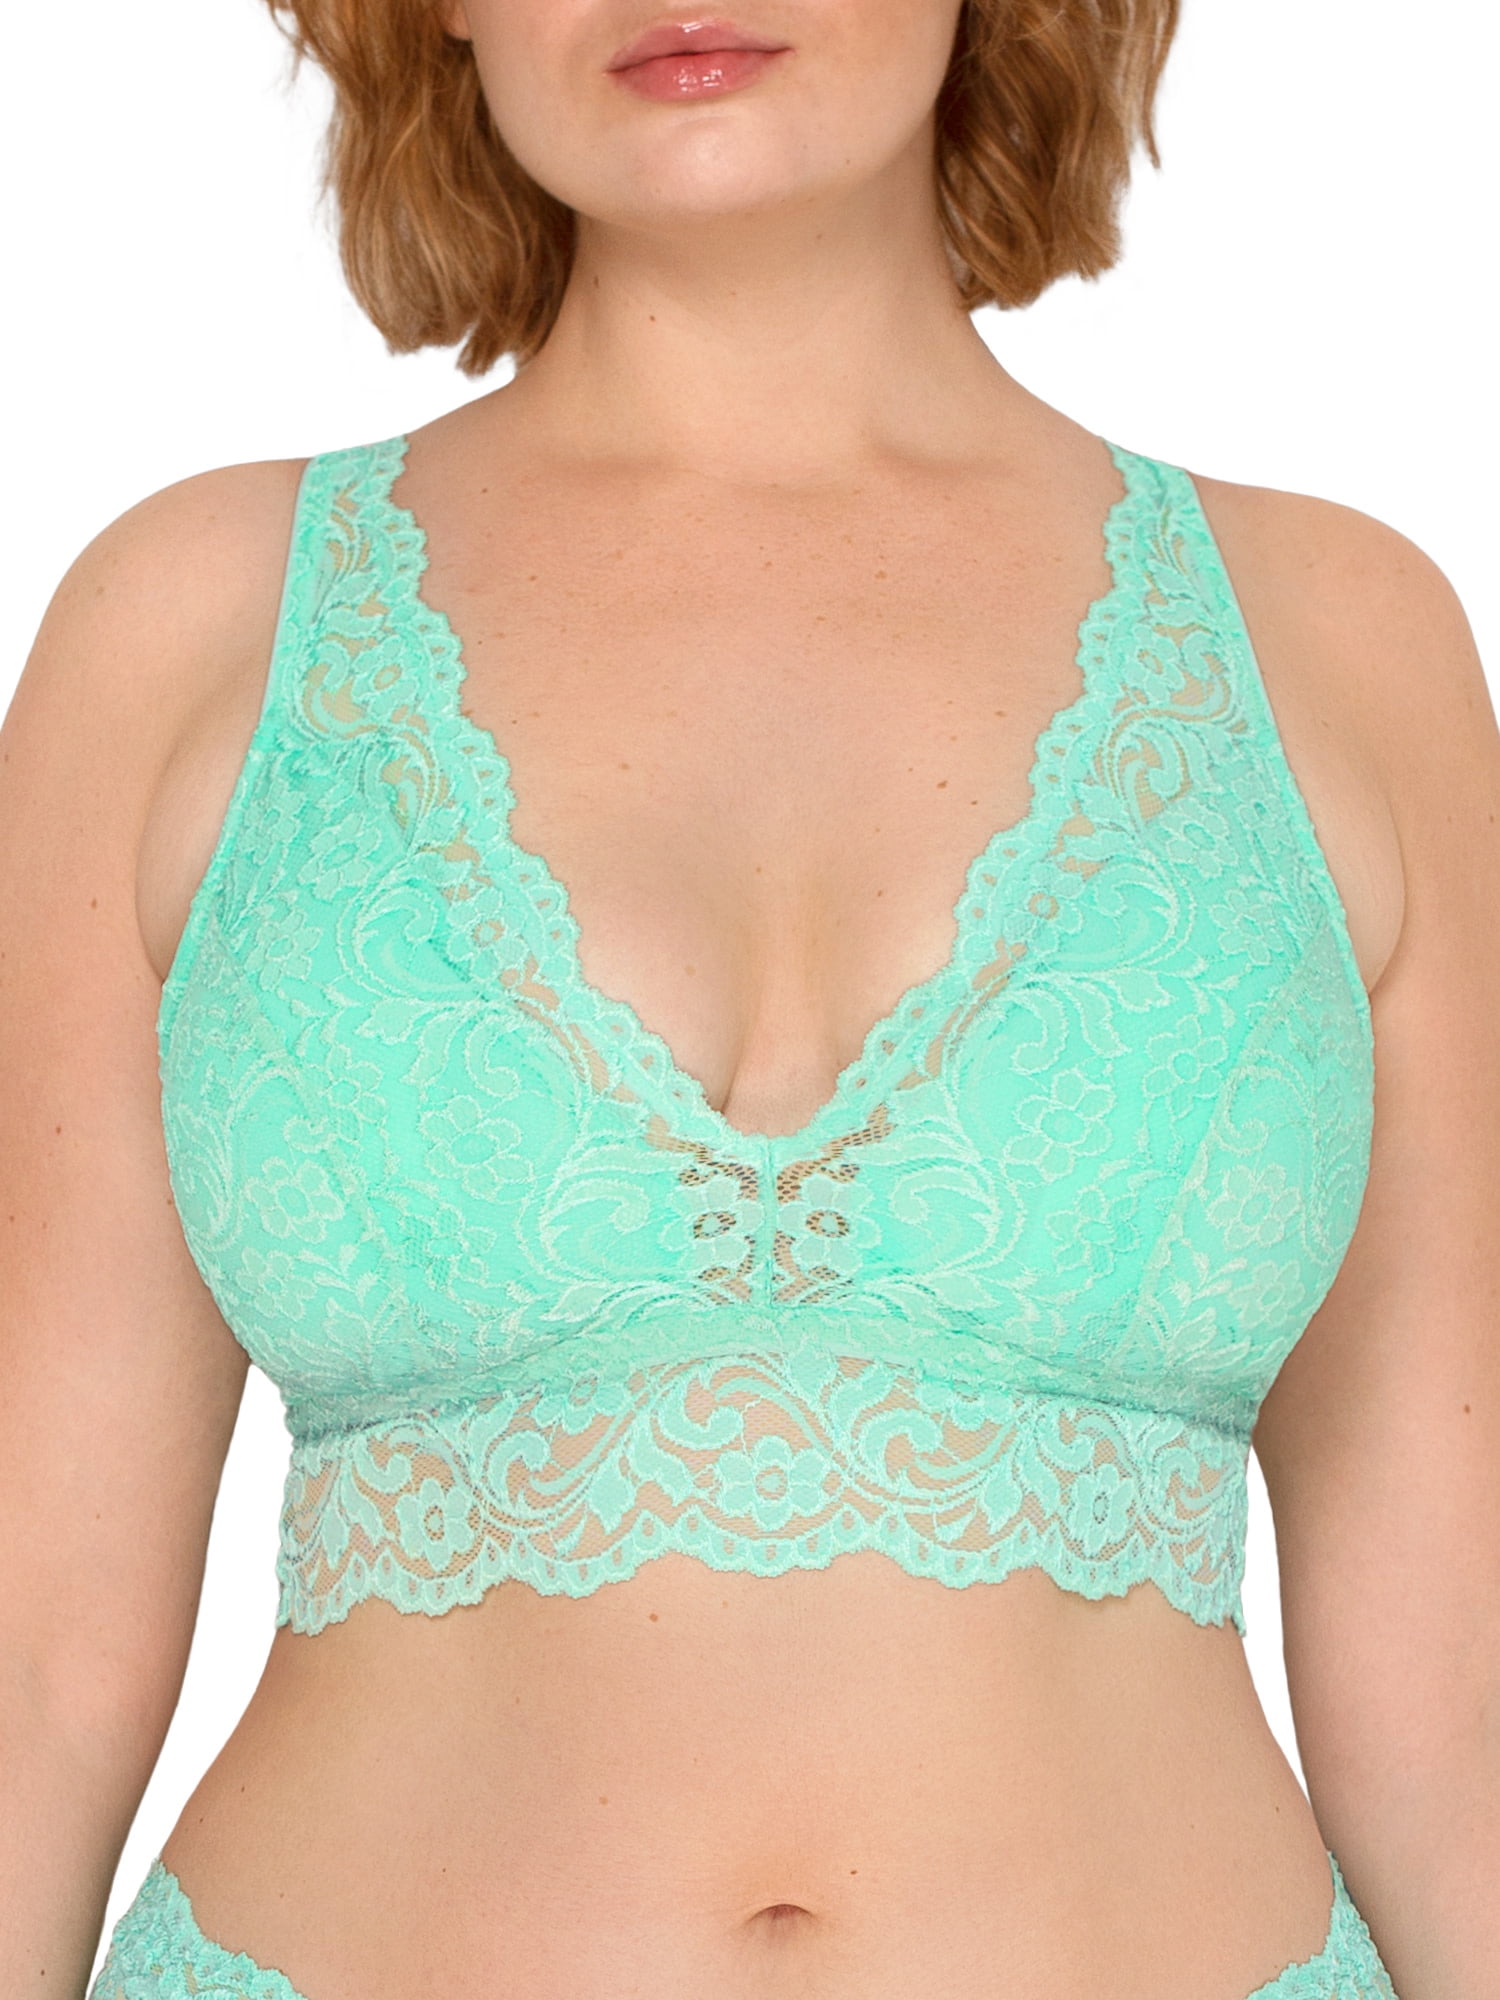 Balconette Lace Bralette , Sexy , Comfortable Bra Top in Choice of Colours  by Fidditch Designs 